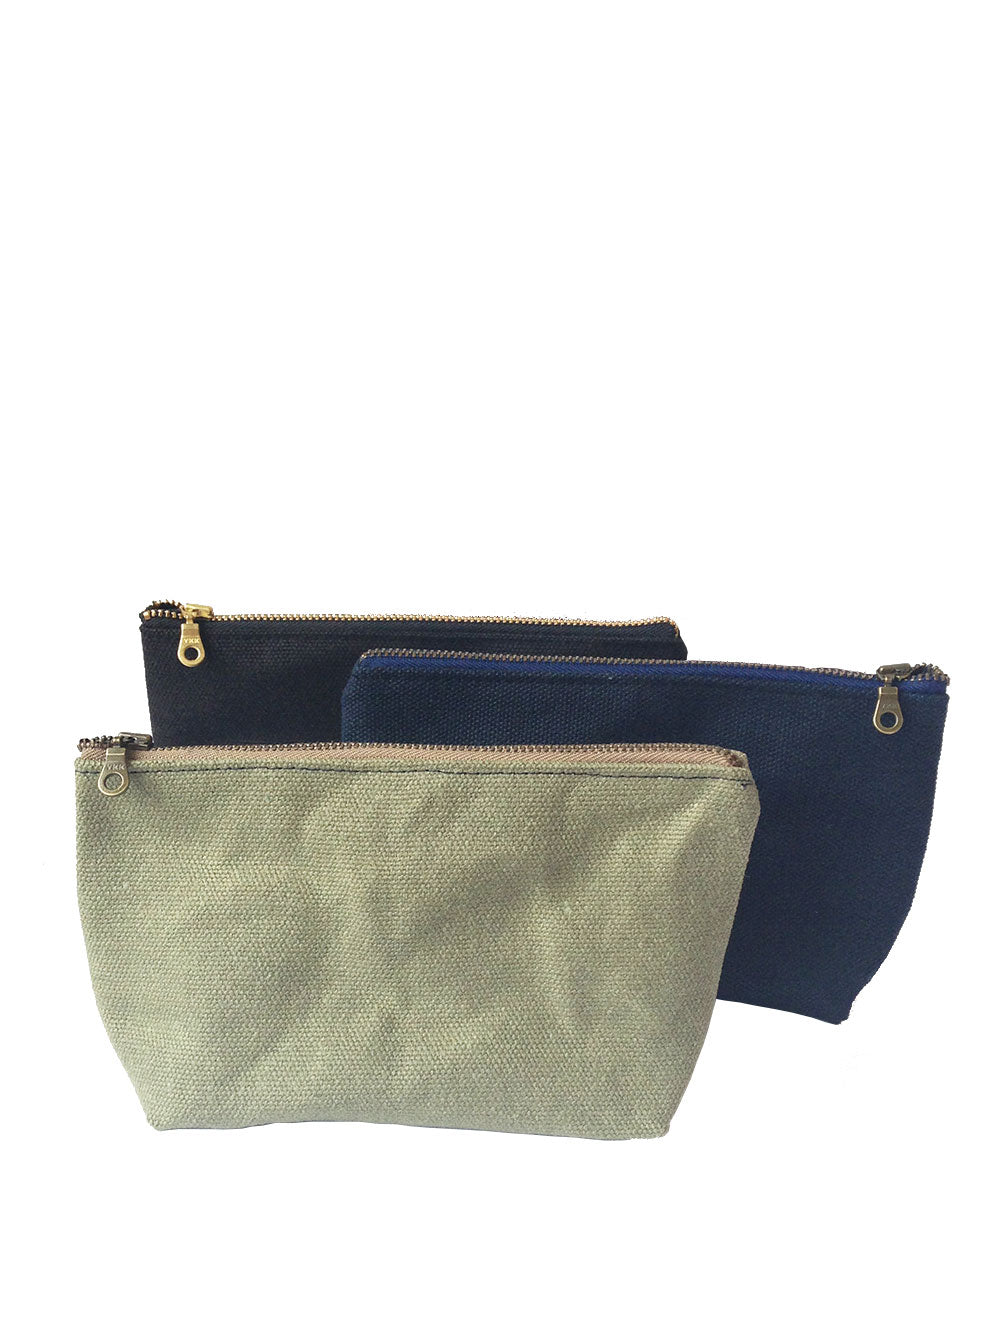 A row of three waxed canvas bags with brass zippers. Black in the black, then navy blue, then sage green on a white background. 